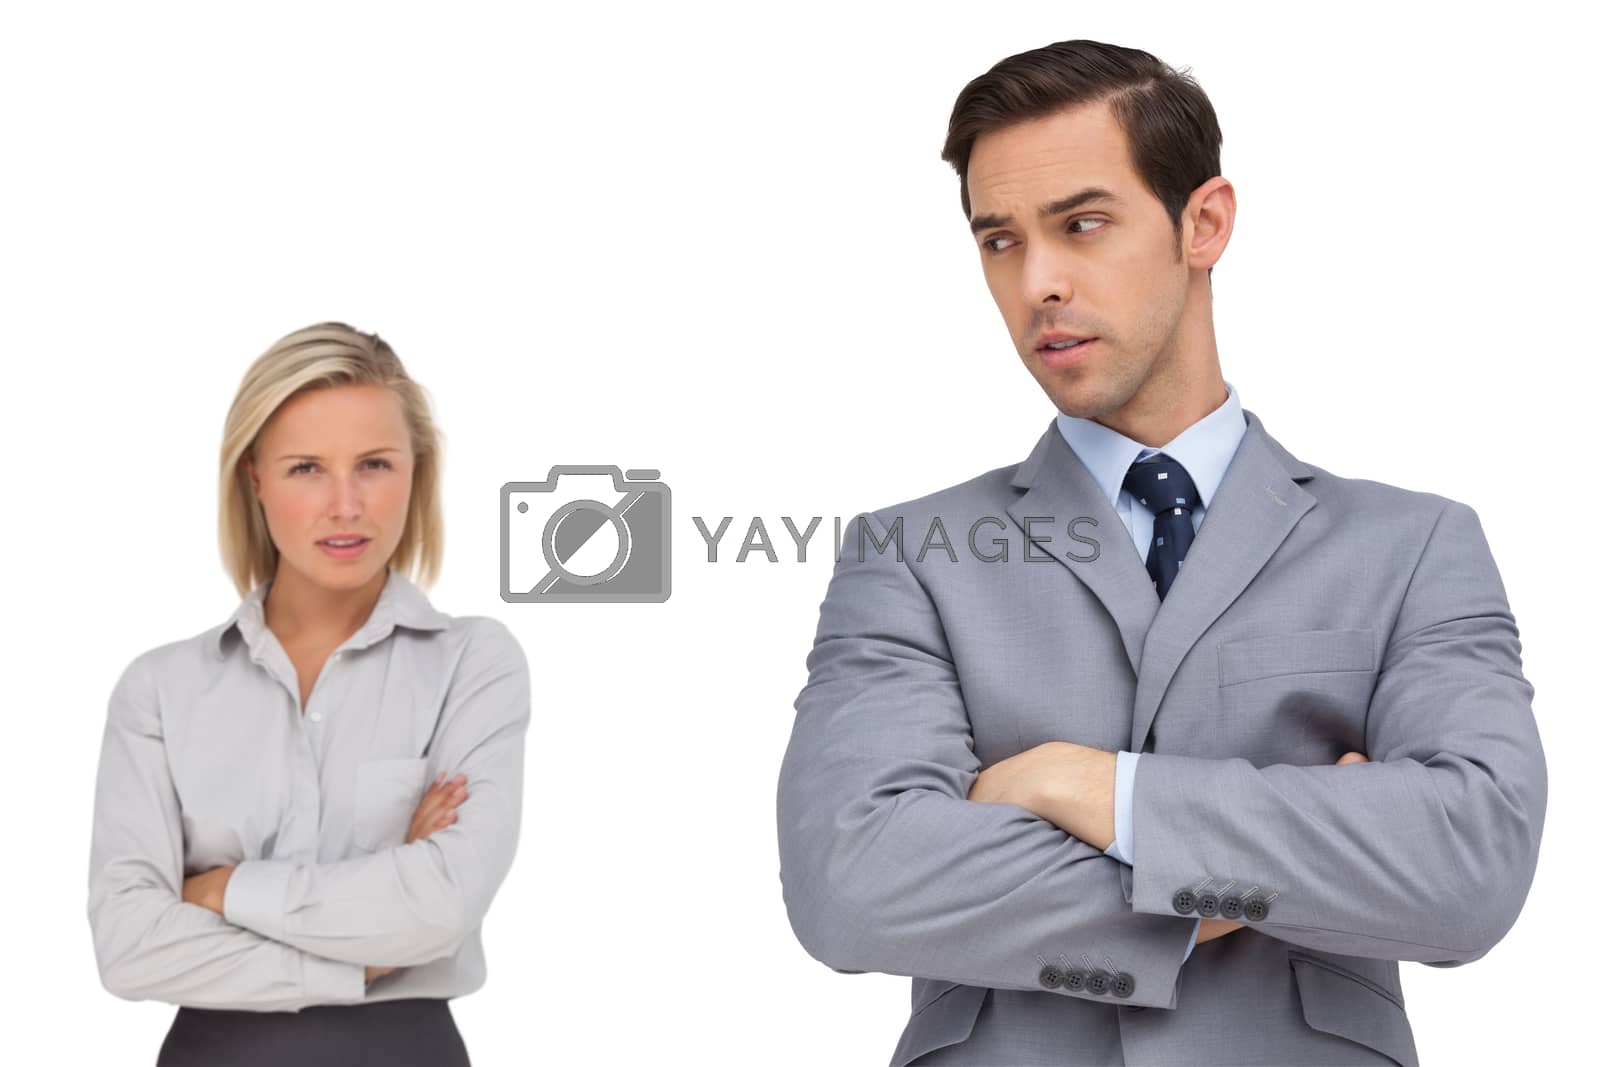 Royalty free image of Business people standing together showing rivalry by Wavebreakmedia